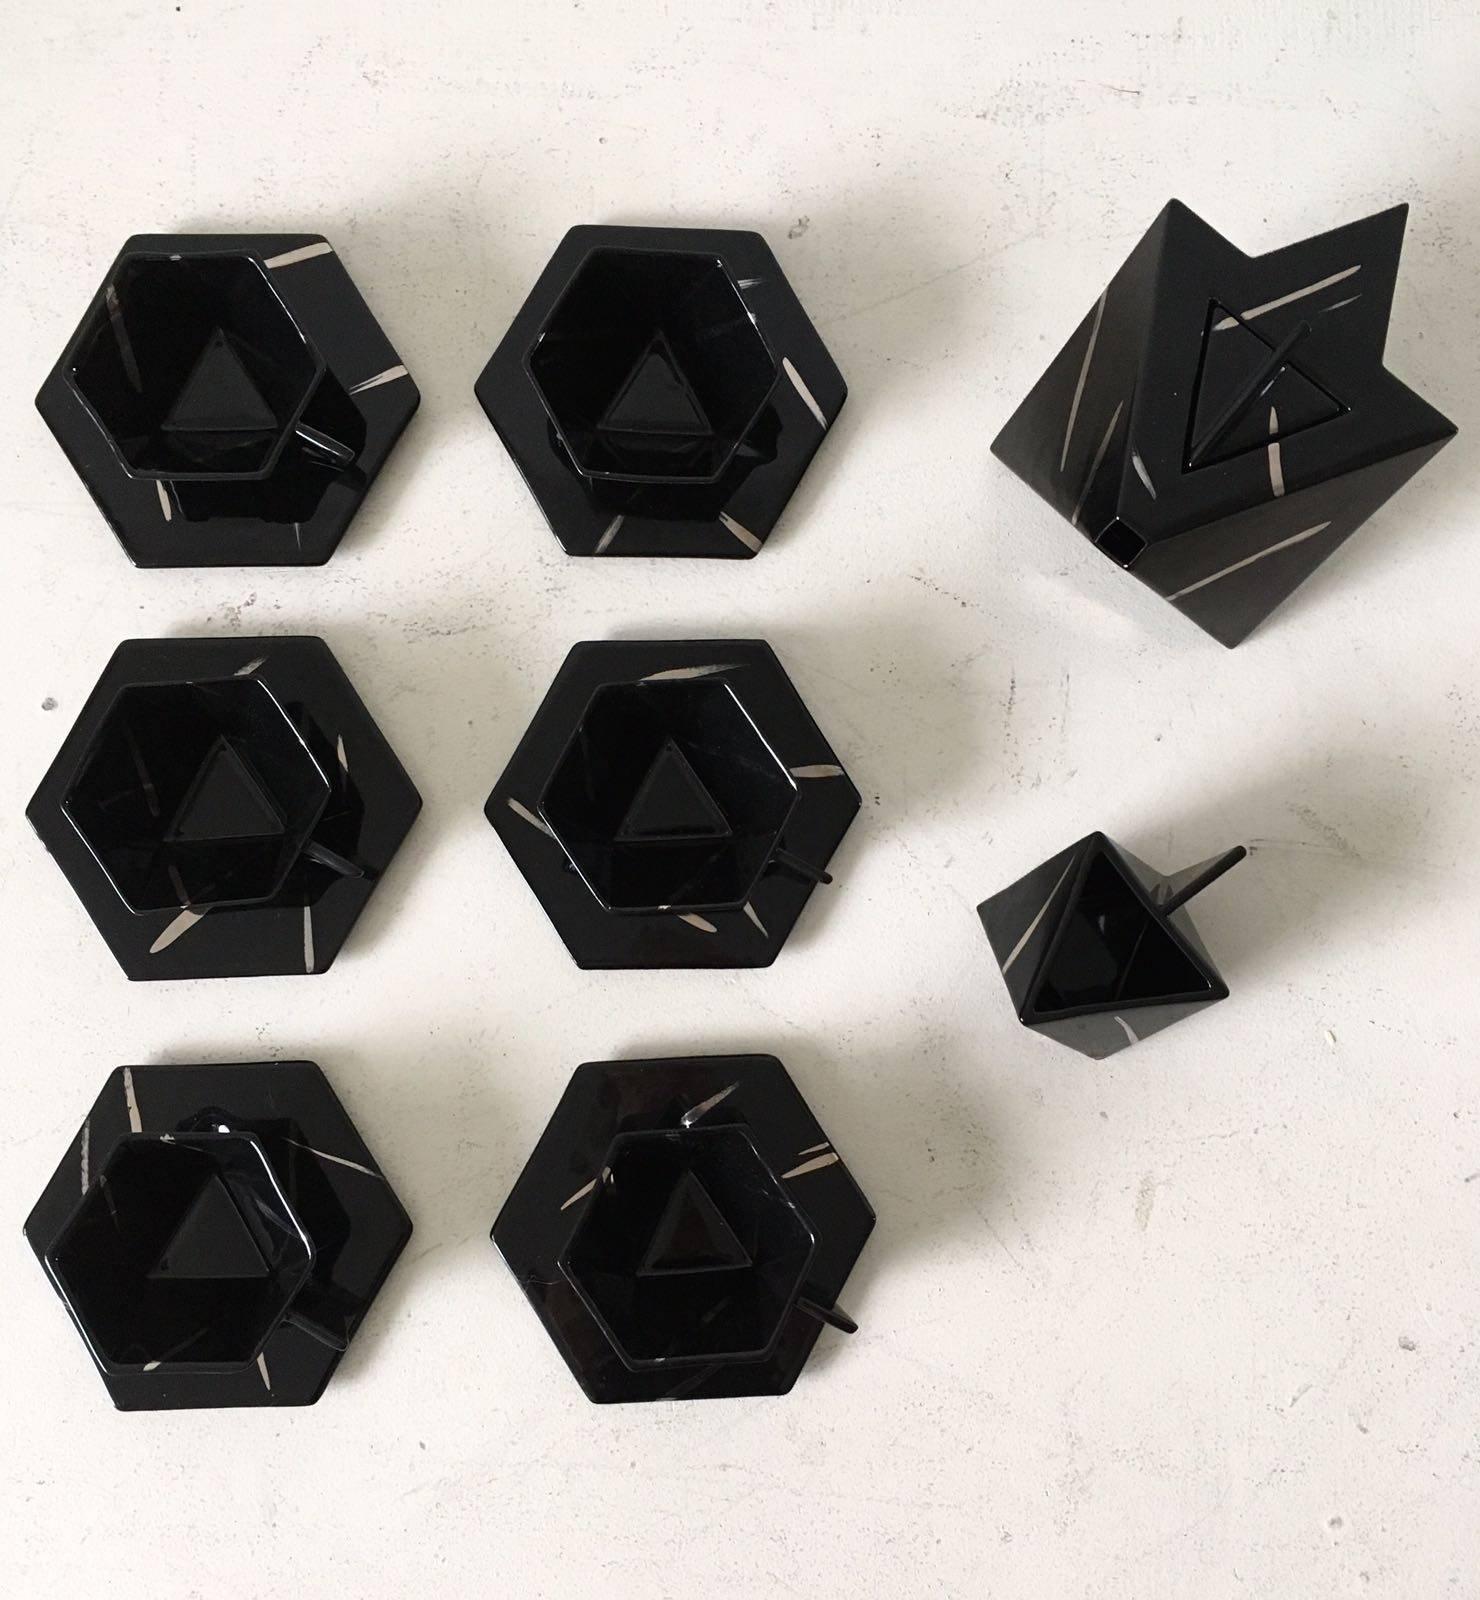 This stunning and rare Hexagonal tea service, unfortunately unsigned, was most likely designed and manufactured in Sweden by Rolf Sinnemark for Rorstrand. This glazed porcelain or stoneware set features Hexagonal and Triangular forms which gives